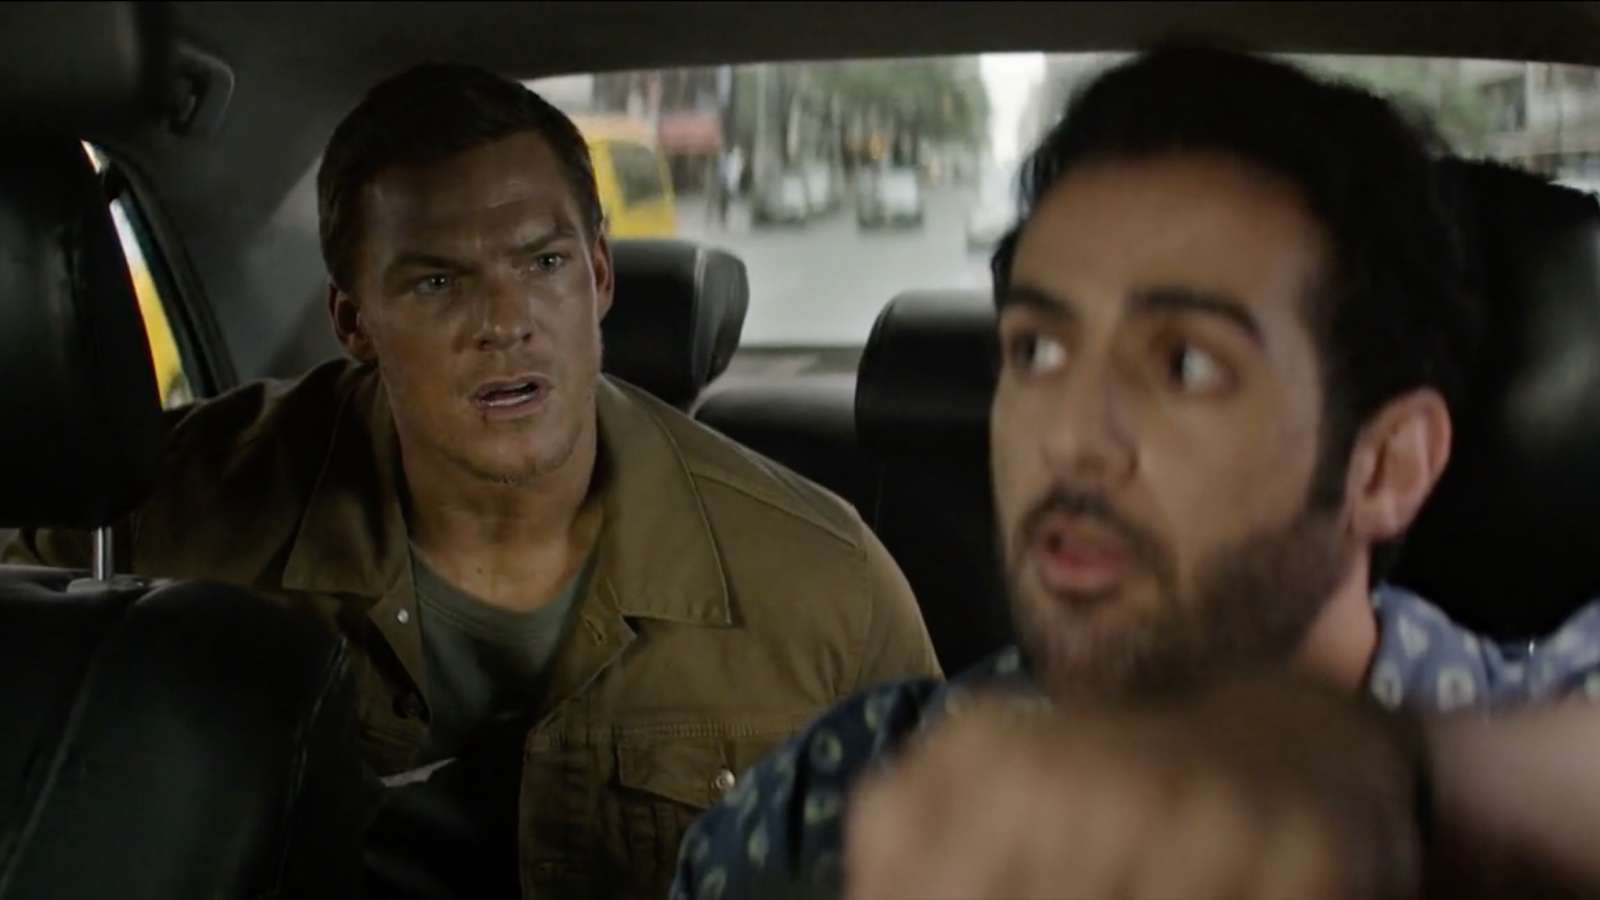 Alan Ritchson in Reacher Season 1 speaking to taxi driver.